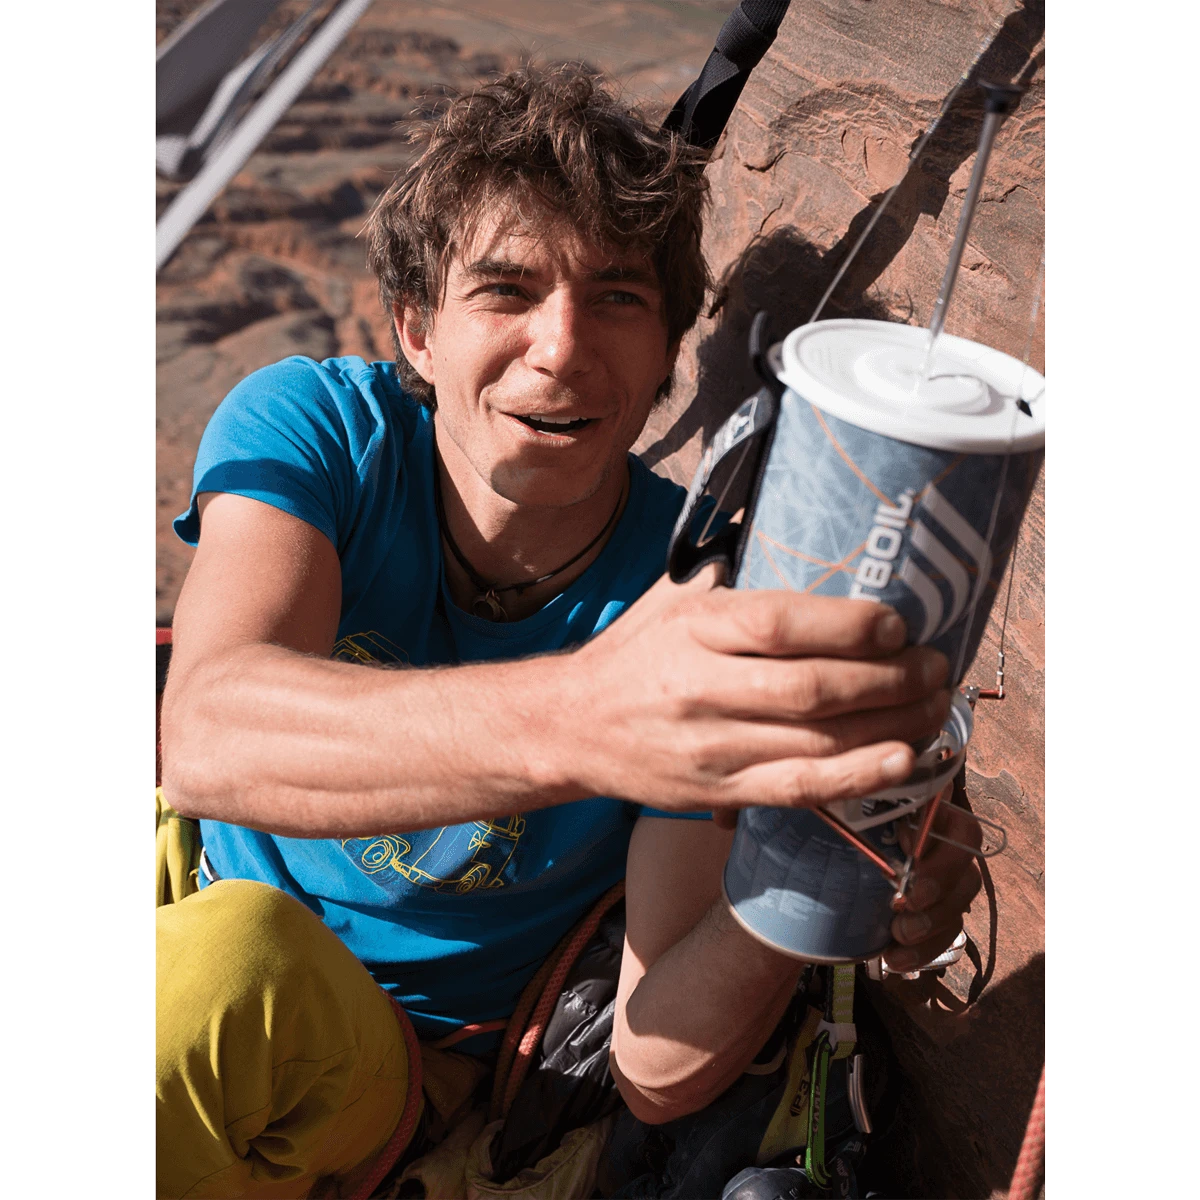 Climber using the Jetboil hanging kit